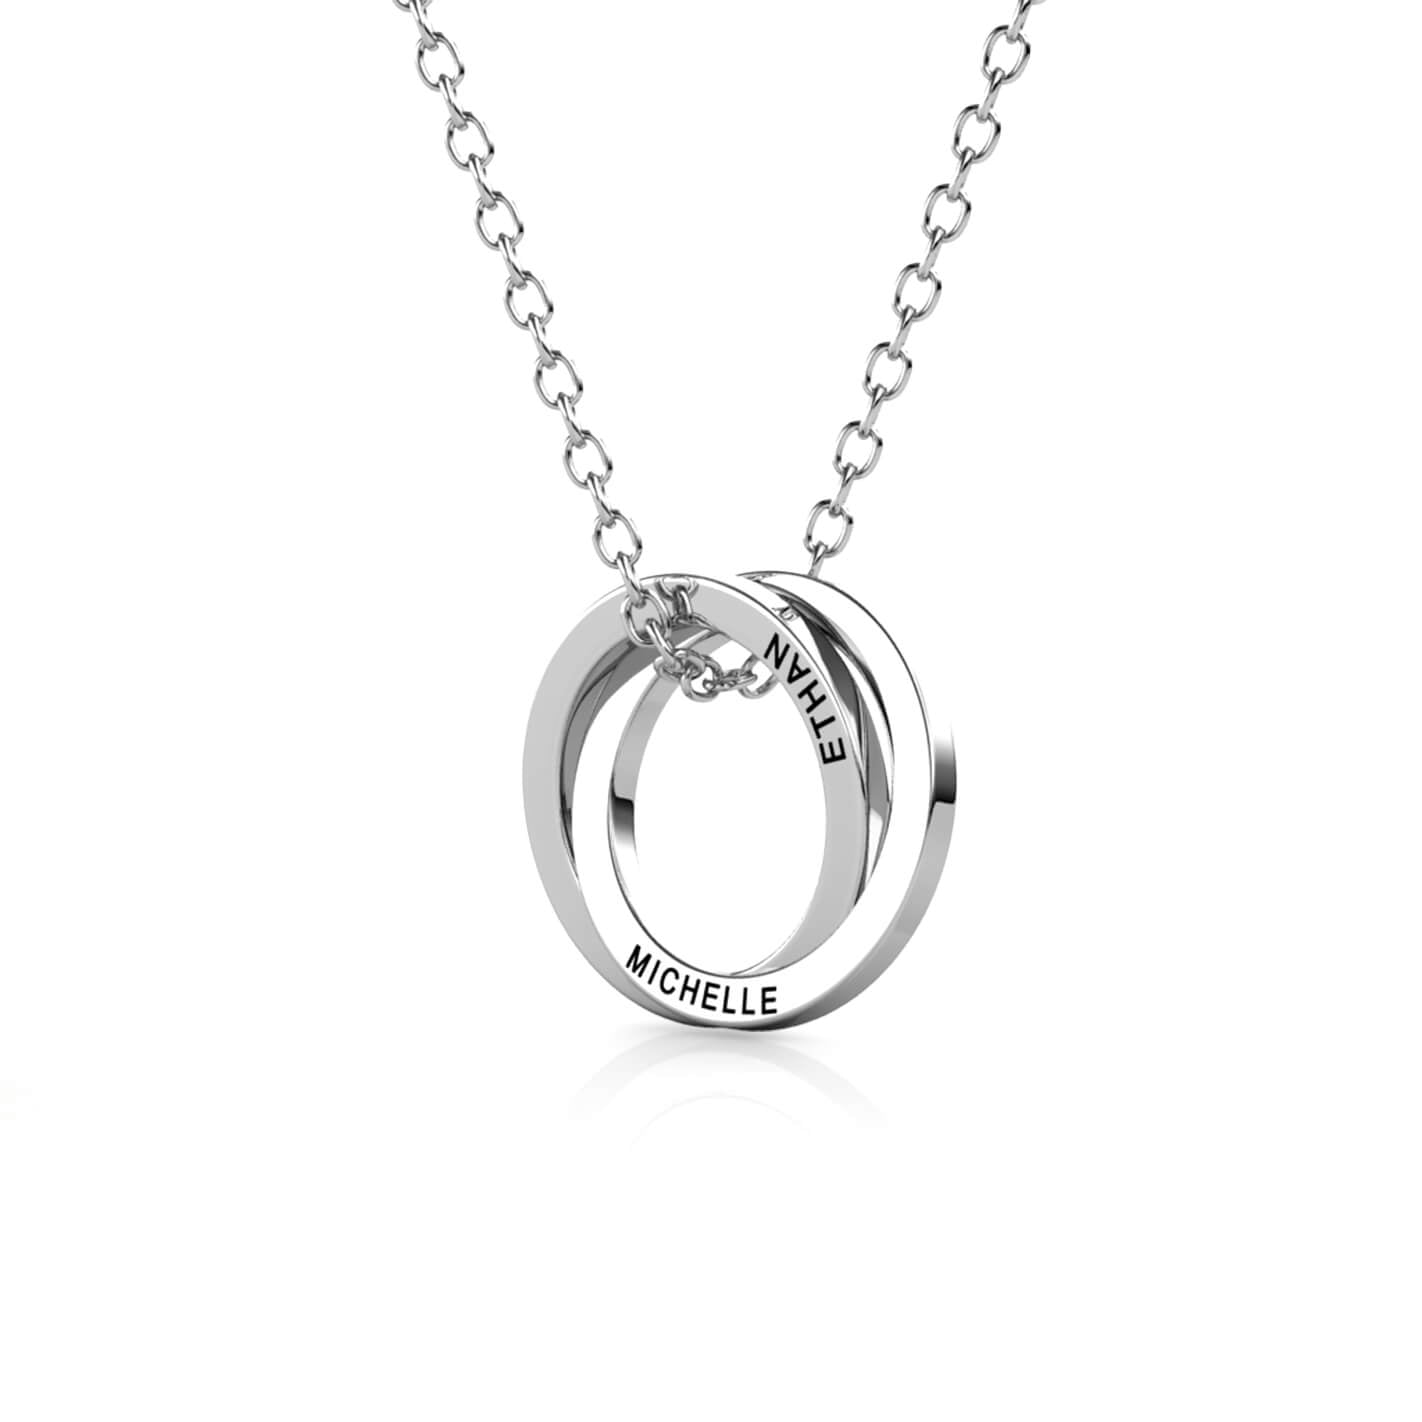 Personalised Russian 2 Rings Engraved Necklace for Grandma & Mum